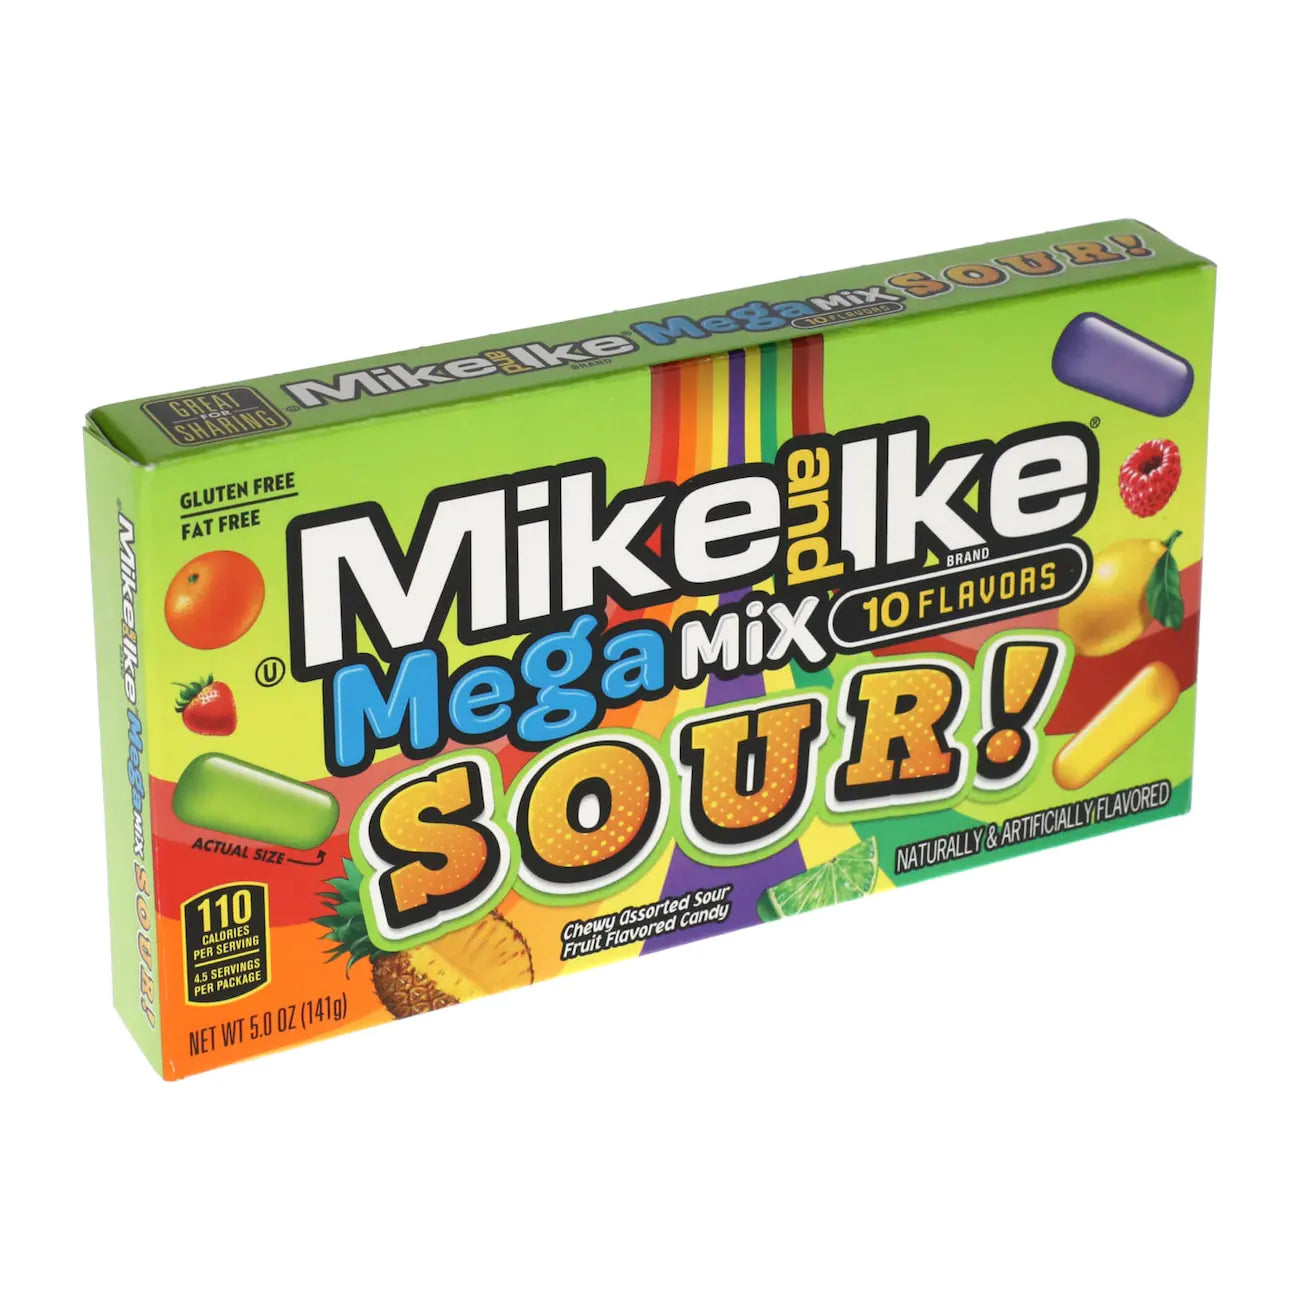 Mike & Ike Sour